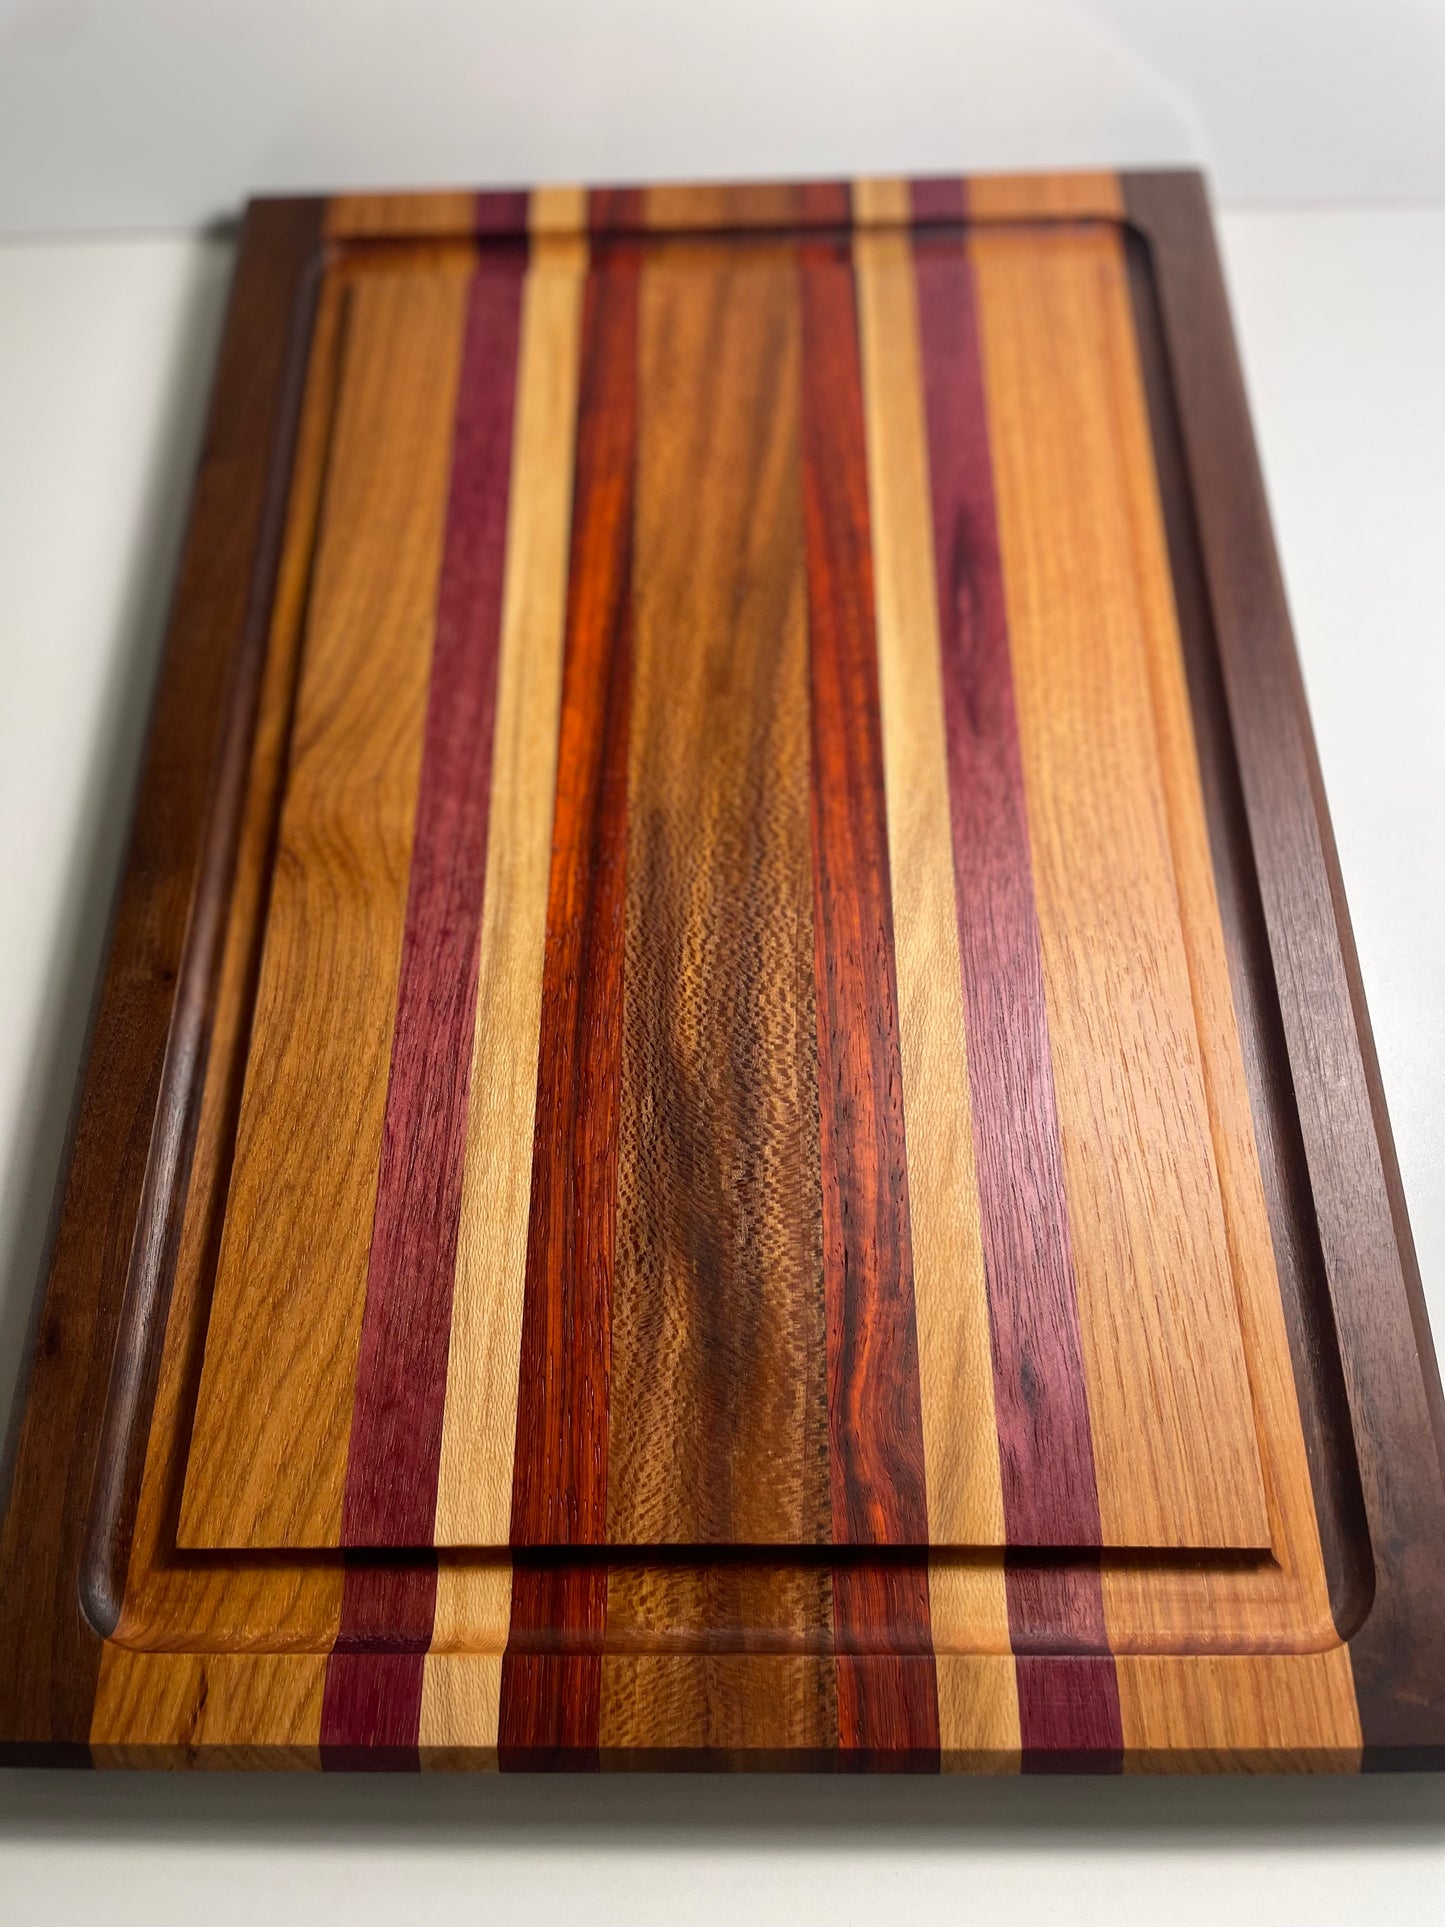 24M007 - Mixed Black Walnut, Hickory, Purpleheart, Sycamore & Padauk Board with Champered Edge & Juice Groove